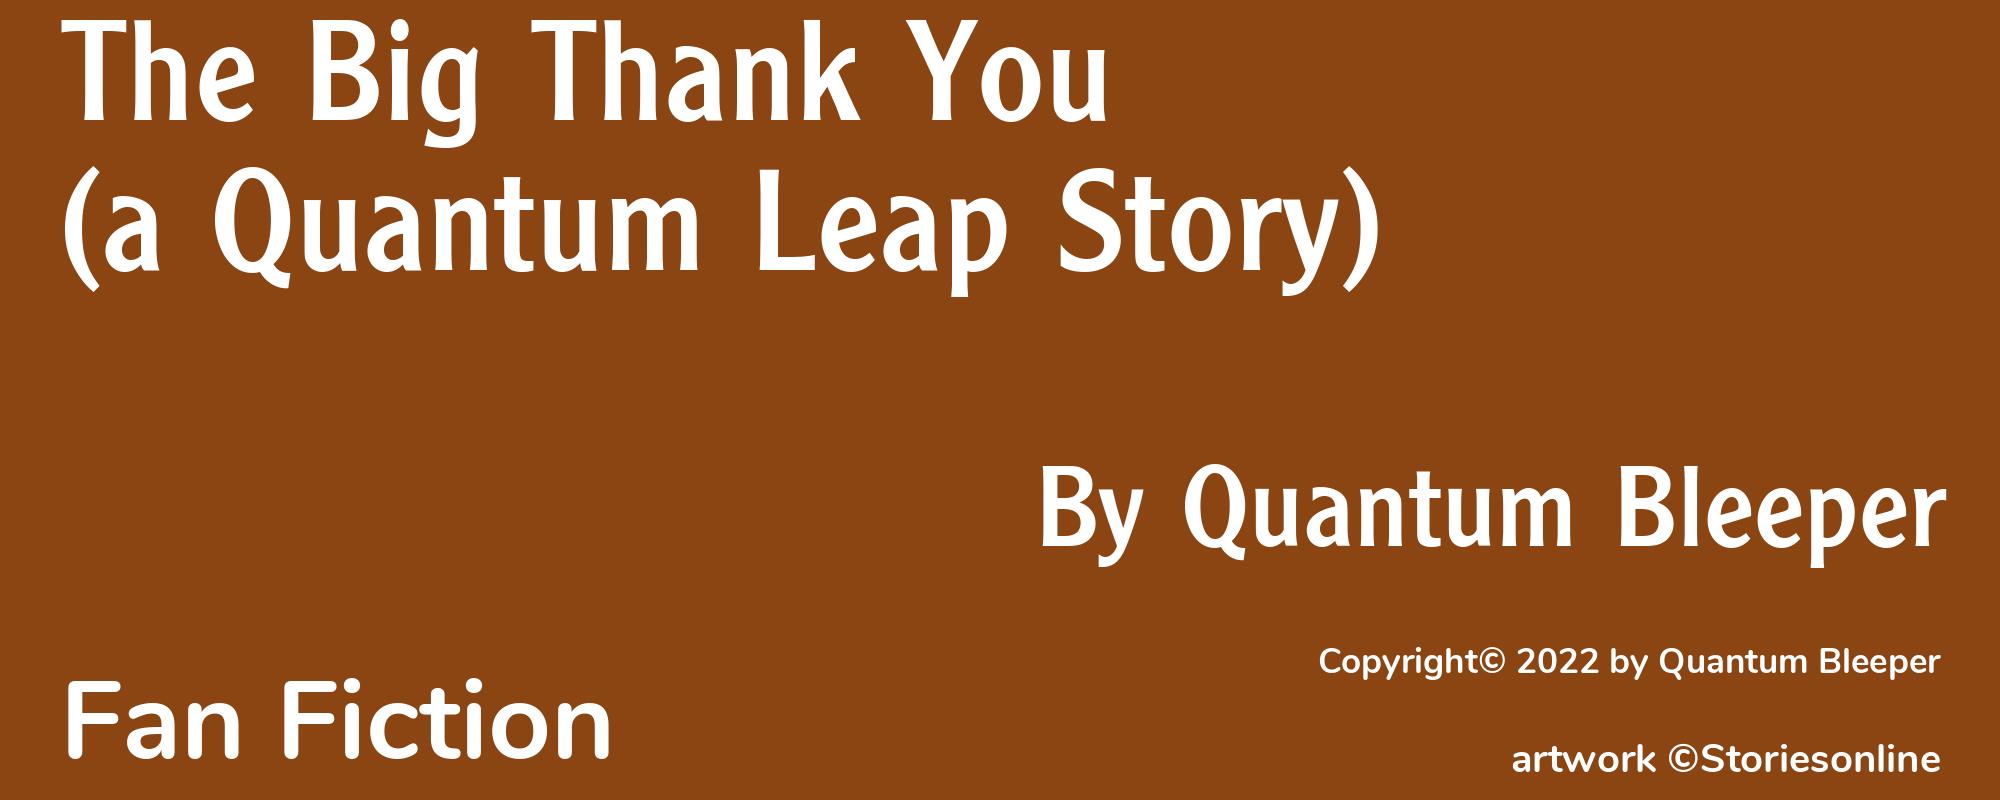 The Big Thank You (a Quantum Leap Story) - Cover